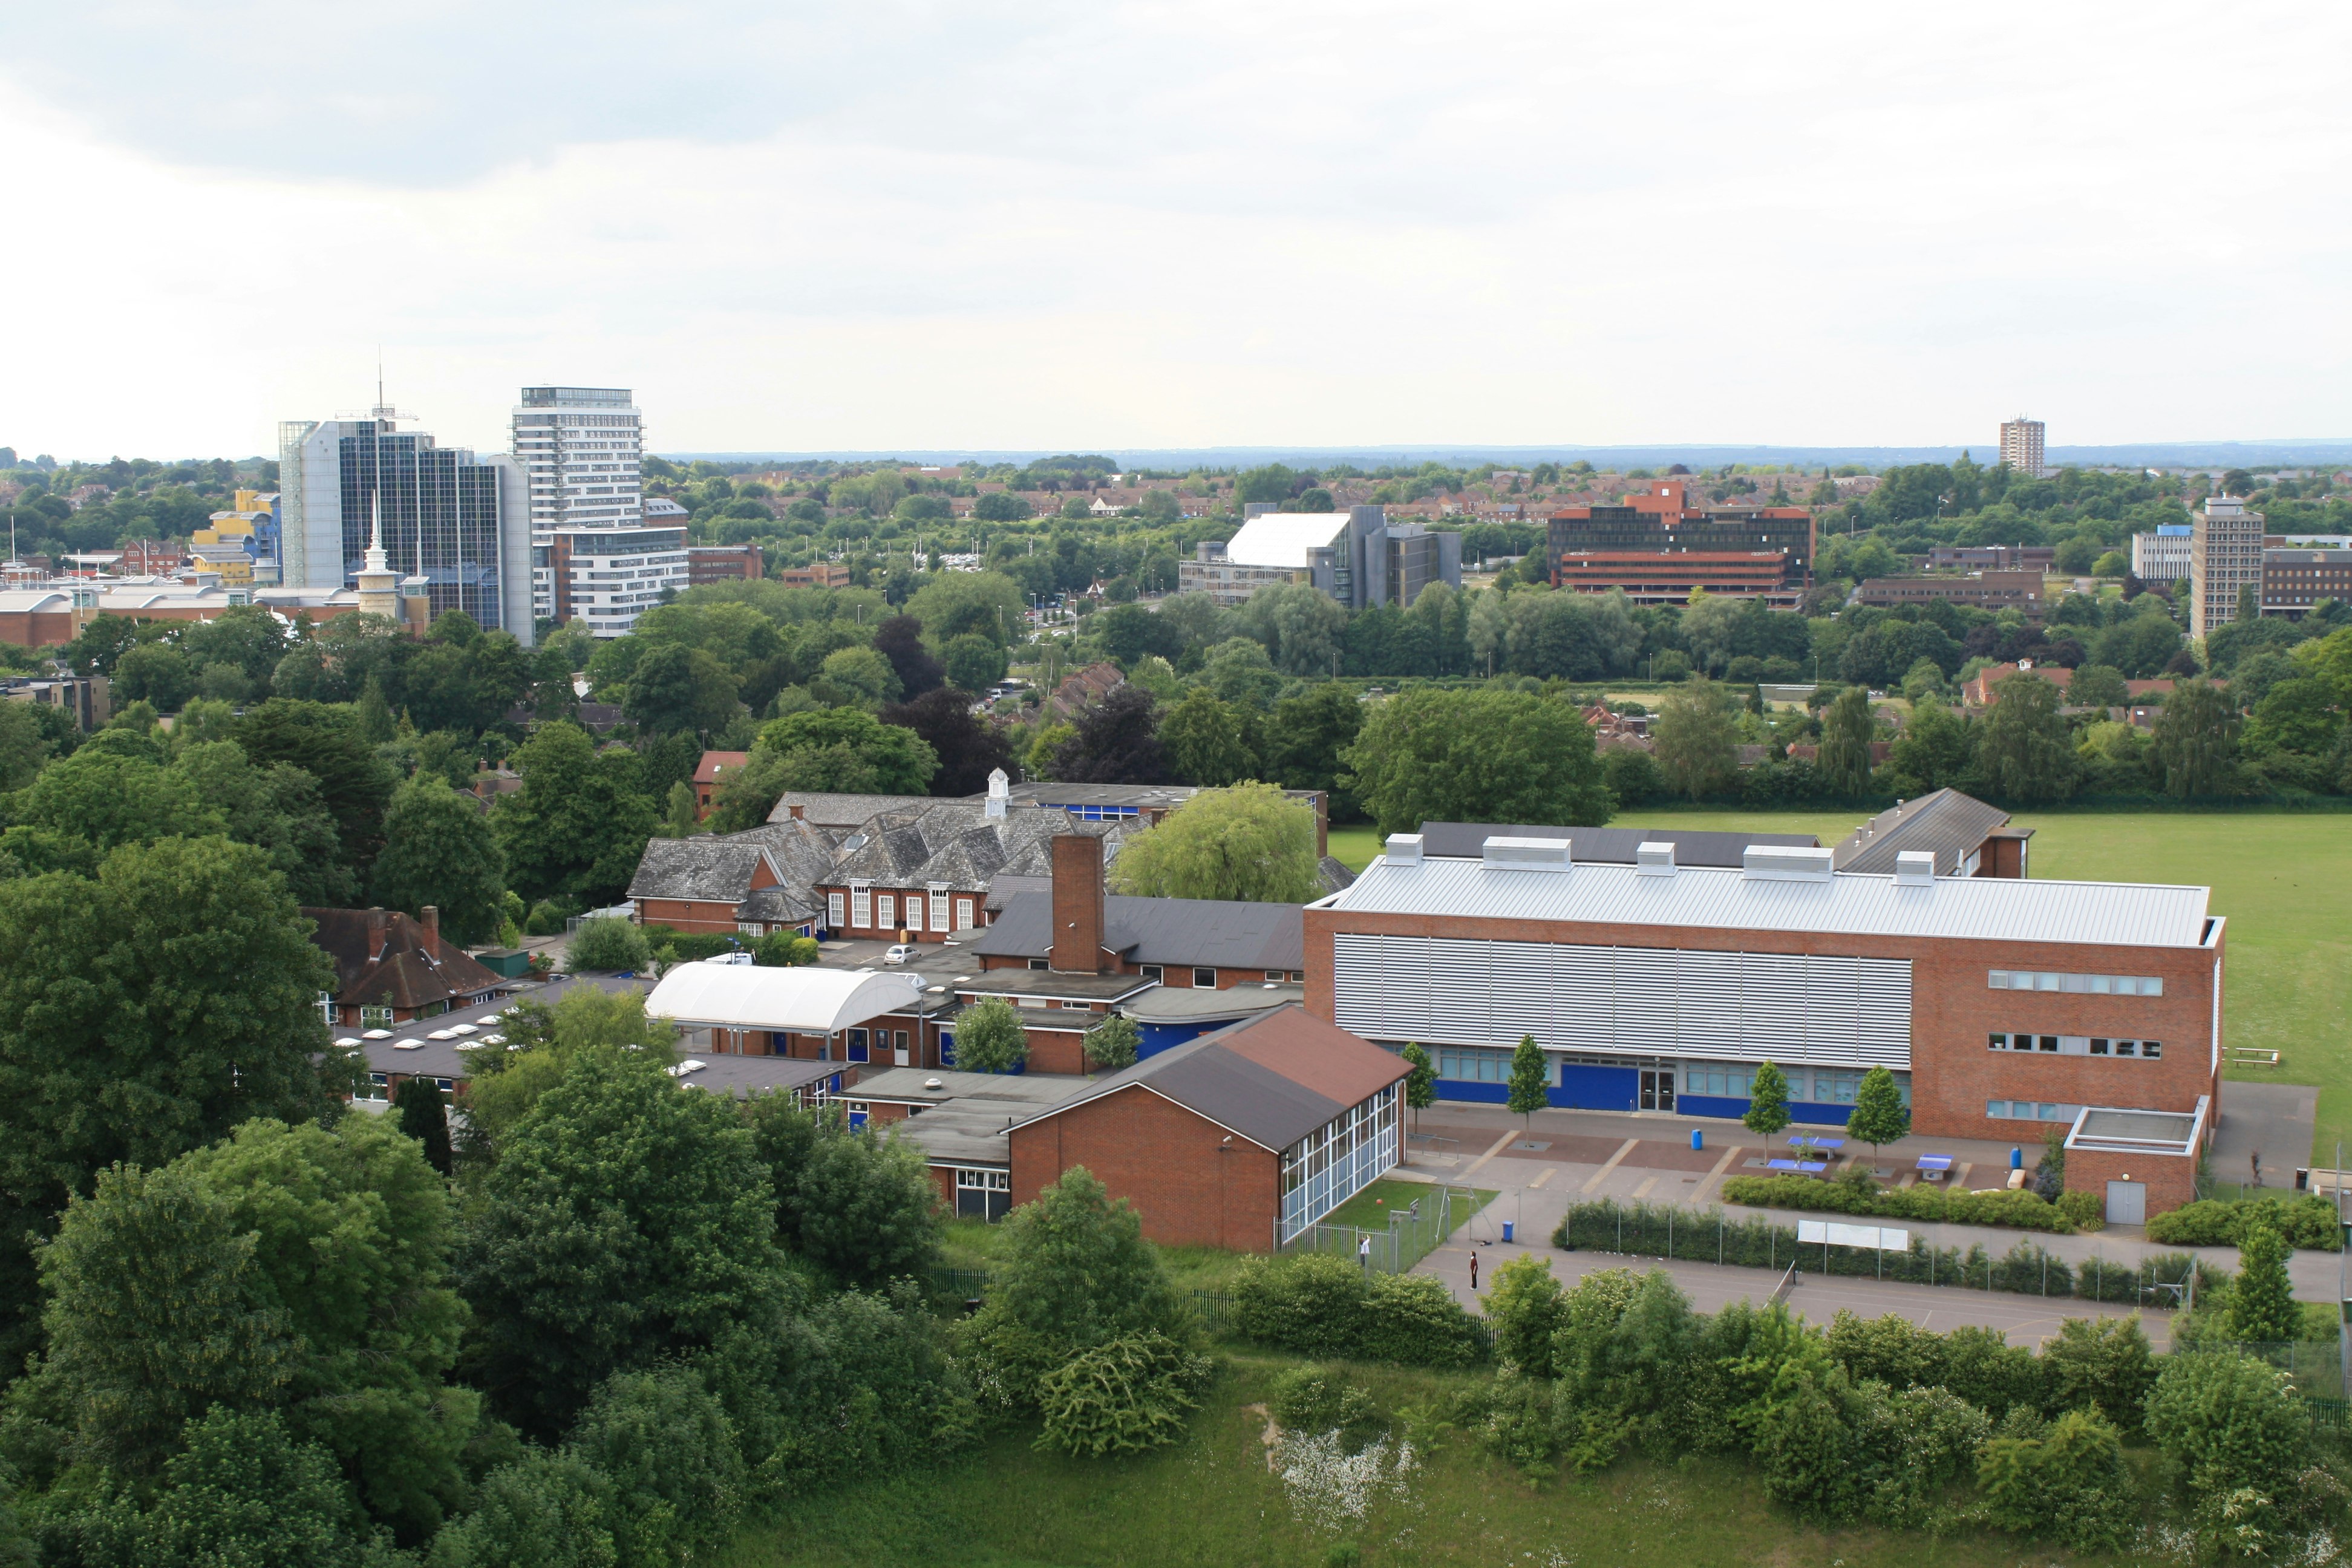 The Costello School from the air. You can see a large building in front with a smaller building on an angle to the left. Behind you can see green fields and in the distance the high rise buildings of Basingstoke town centre.